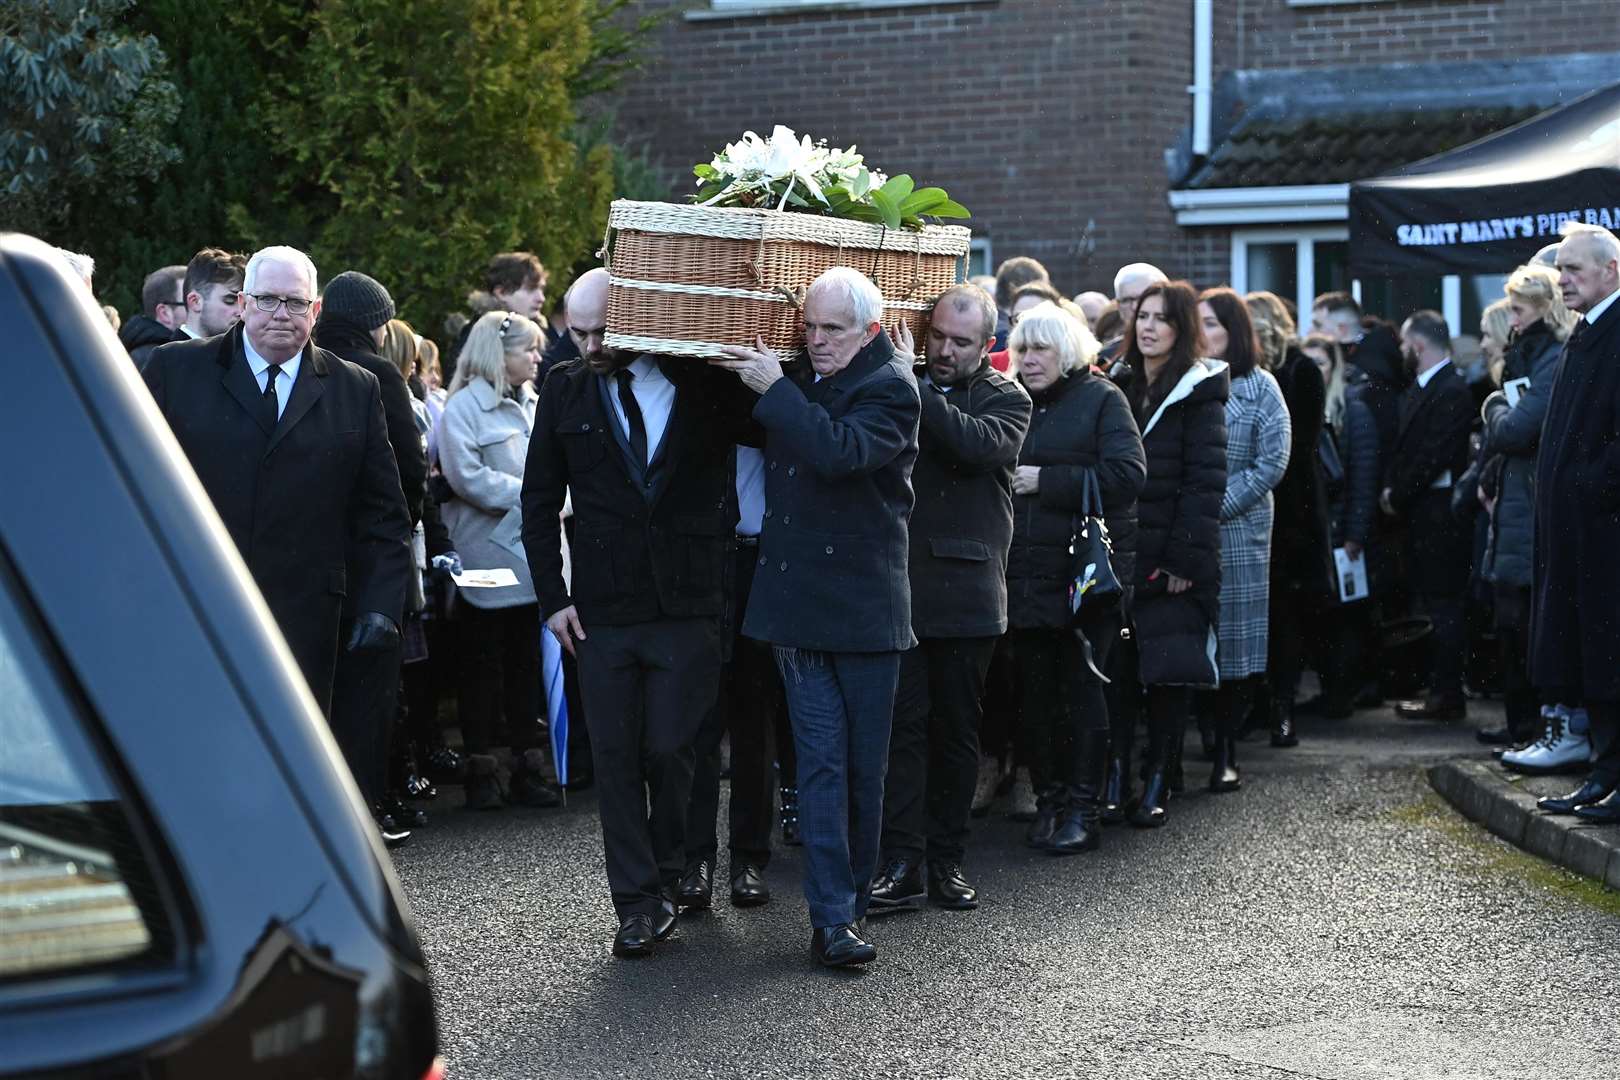 Family members carry the casket of murder victim Natalie McNally following her funeral service at her parents’ home in Lurgan (Oliver McVeigh/PA)